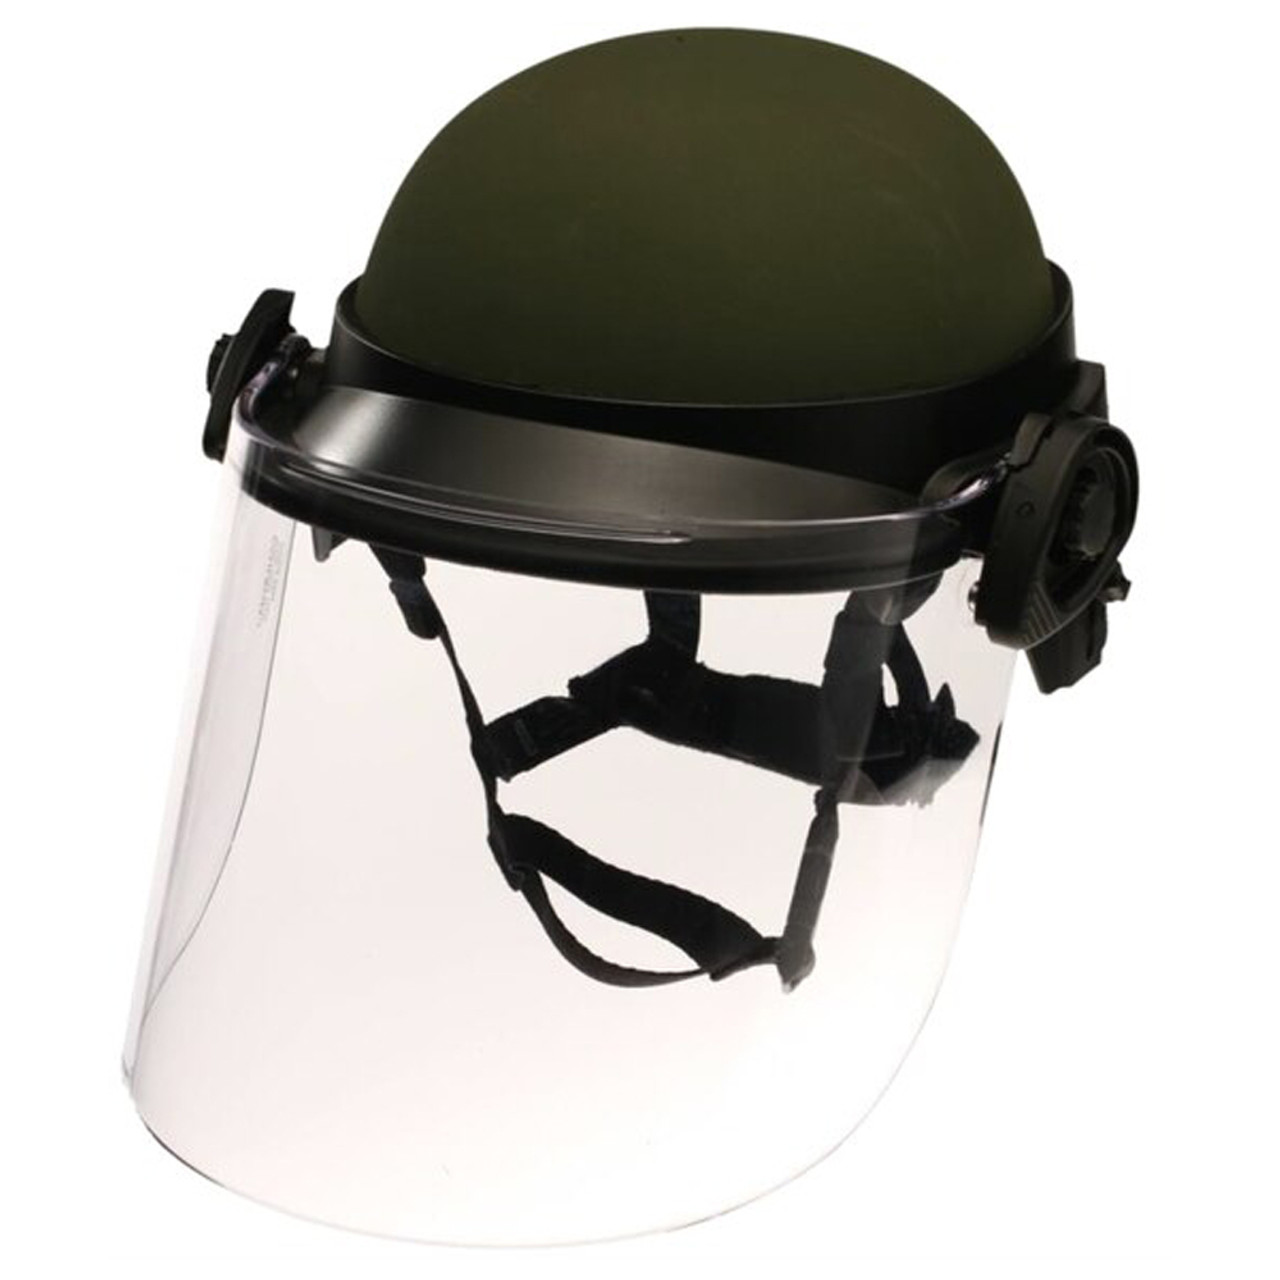 Paulson DK6-H.150 Field Mount Tactical Face Shield designed to fit most ballistic helmets (ACH, MICH, and PASGT style).  Shield length is 8 inches. Shield thickness is .150 inches.